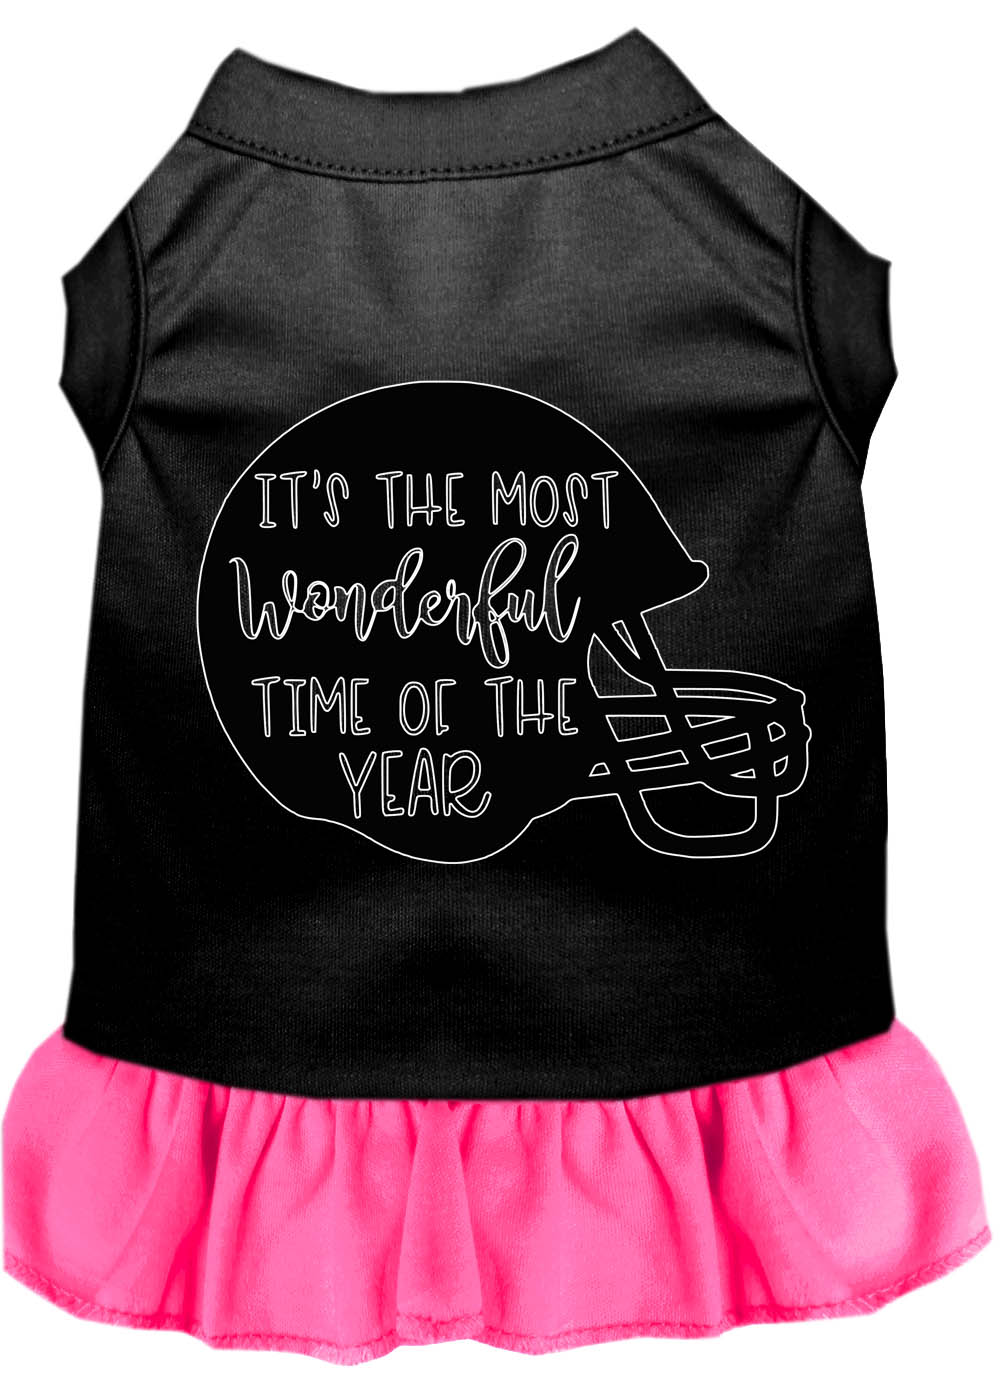 Most Wonderful Time of the Year (Football) Screen Print Dog Dress Black with Bright Pink Lg